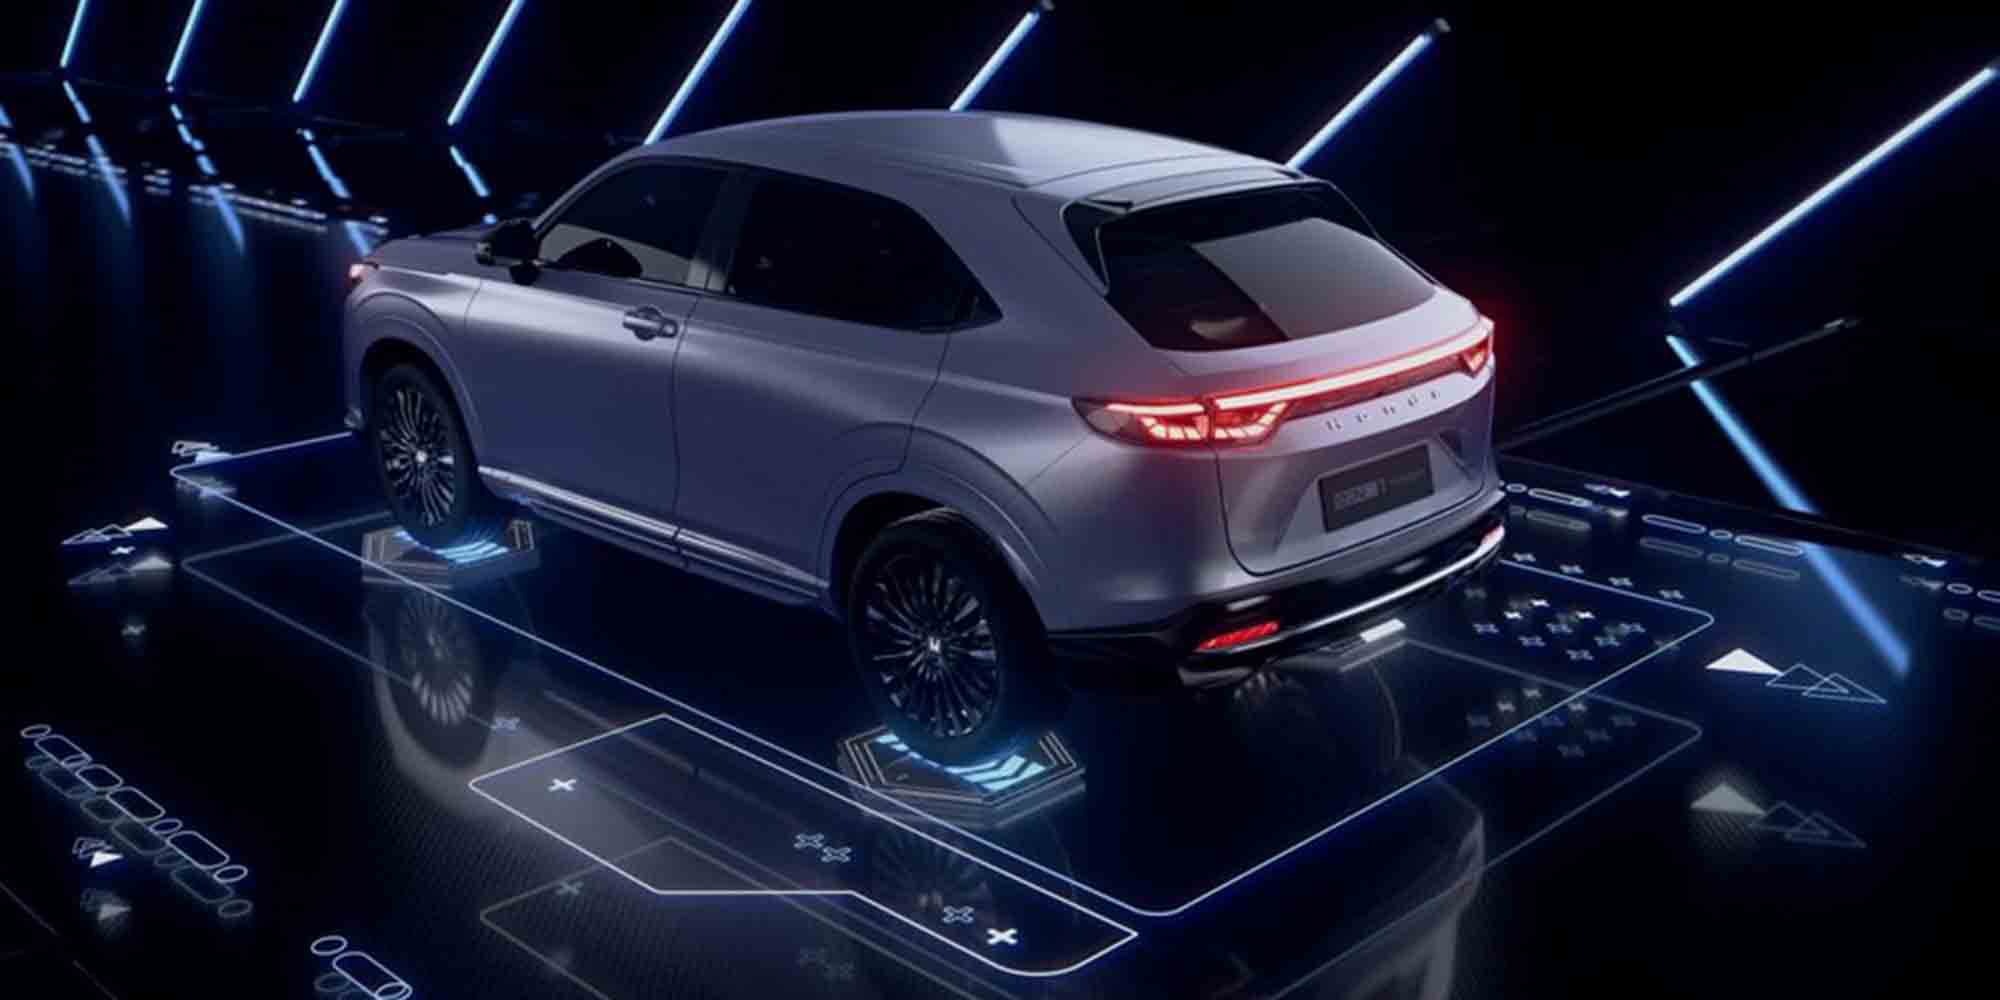 HONDA MEETS ‘ELECTRIC VISION’ 2022 TARGET AND ANNOUNCES THRE